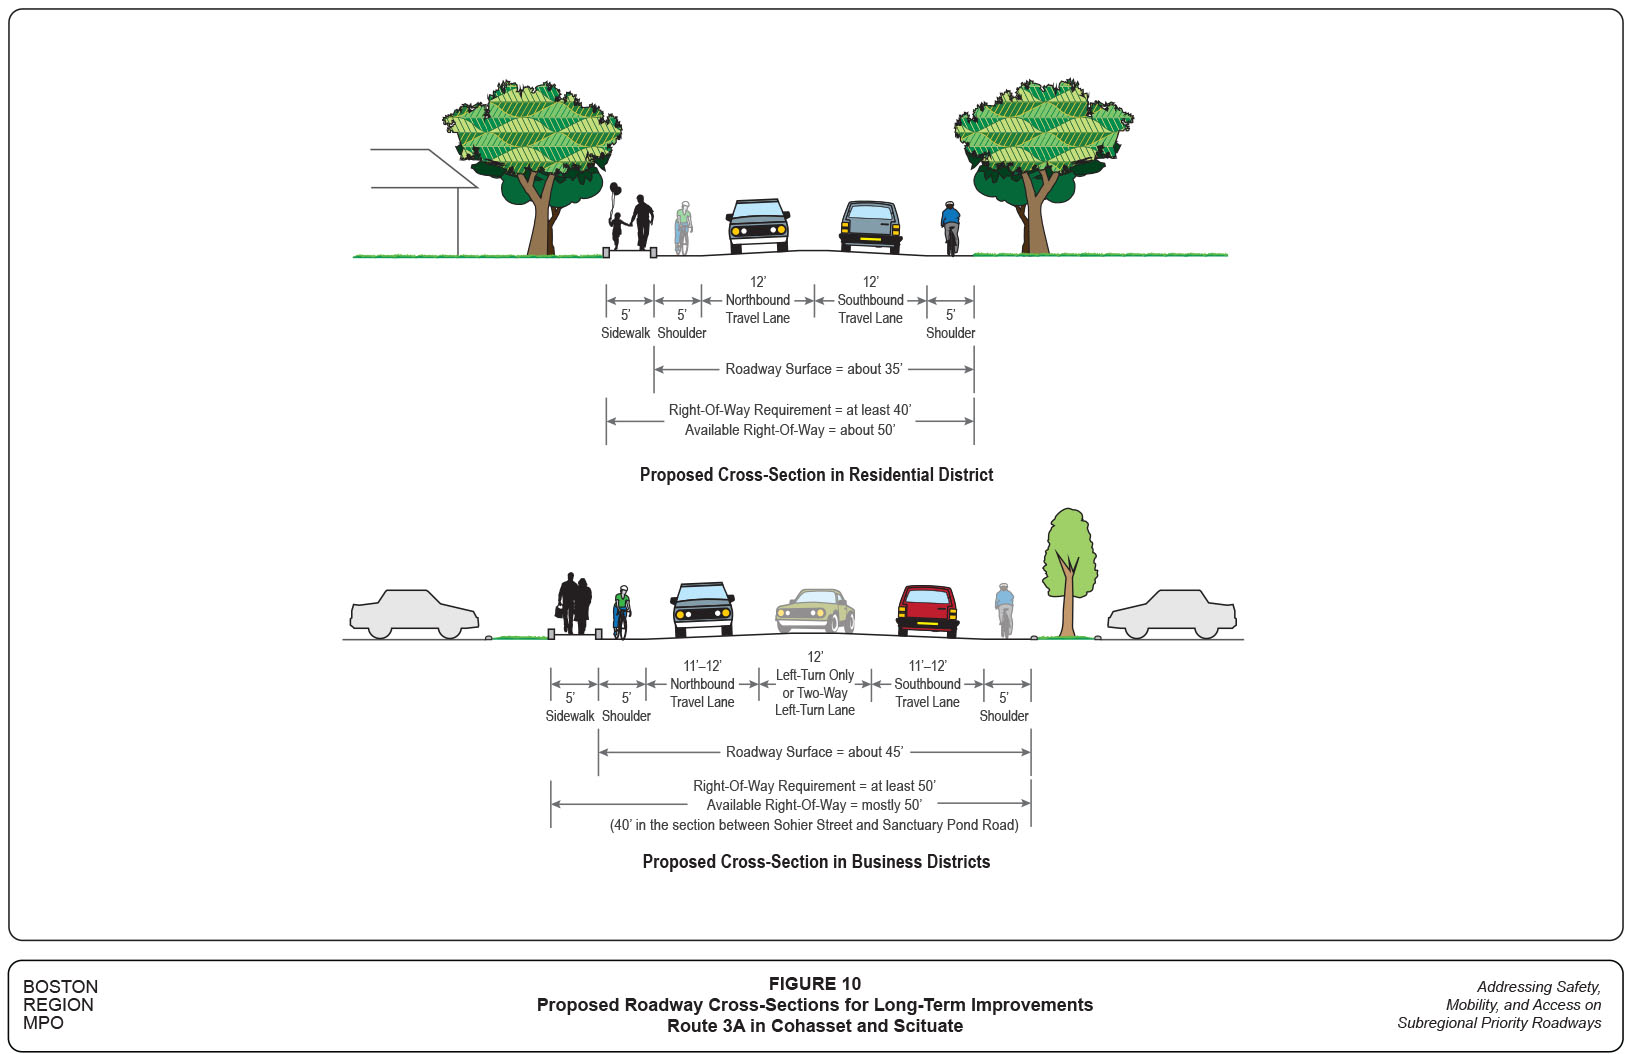 Figure 10 is a diagram that depicts the proposed roadway cross-sections cited for long-term Improvements in the residential and business districts of the corridor.